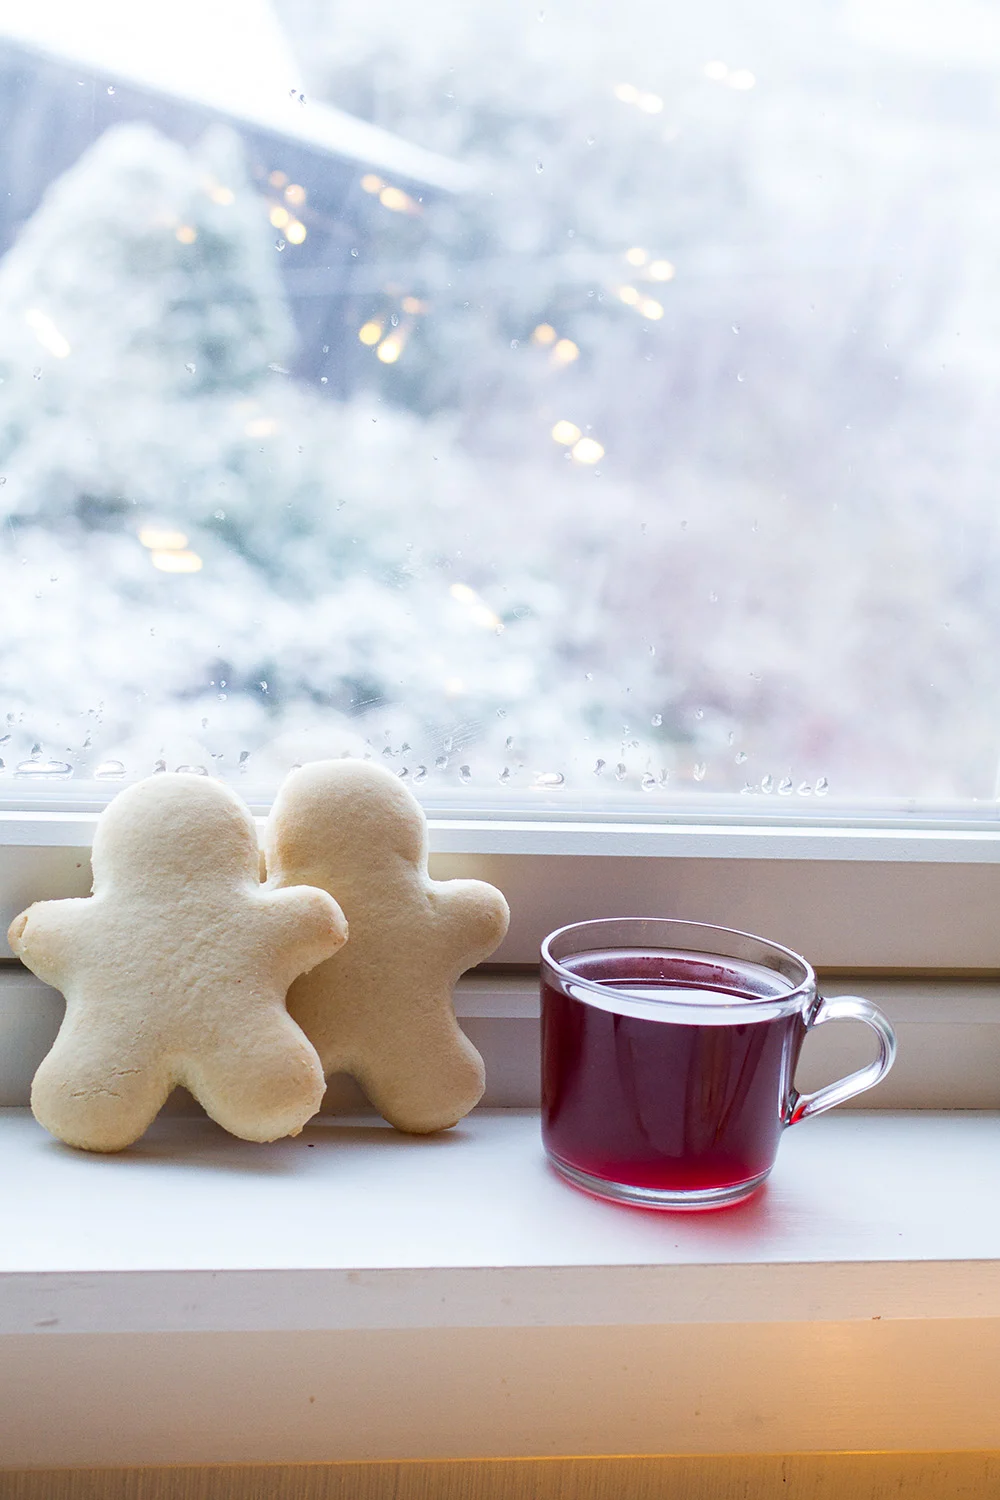 Two Christmas Men cookies in the window sill with a glass mug with mulled wine.